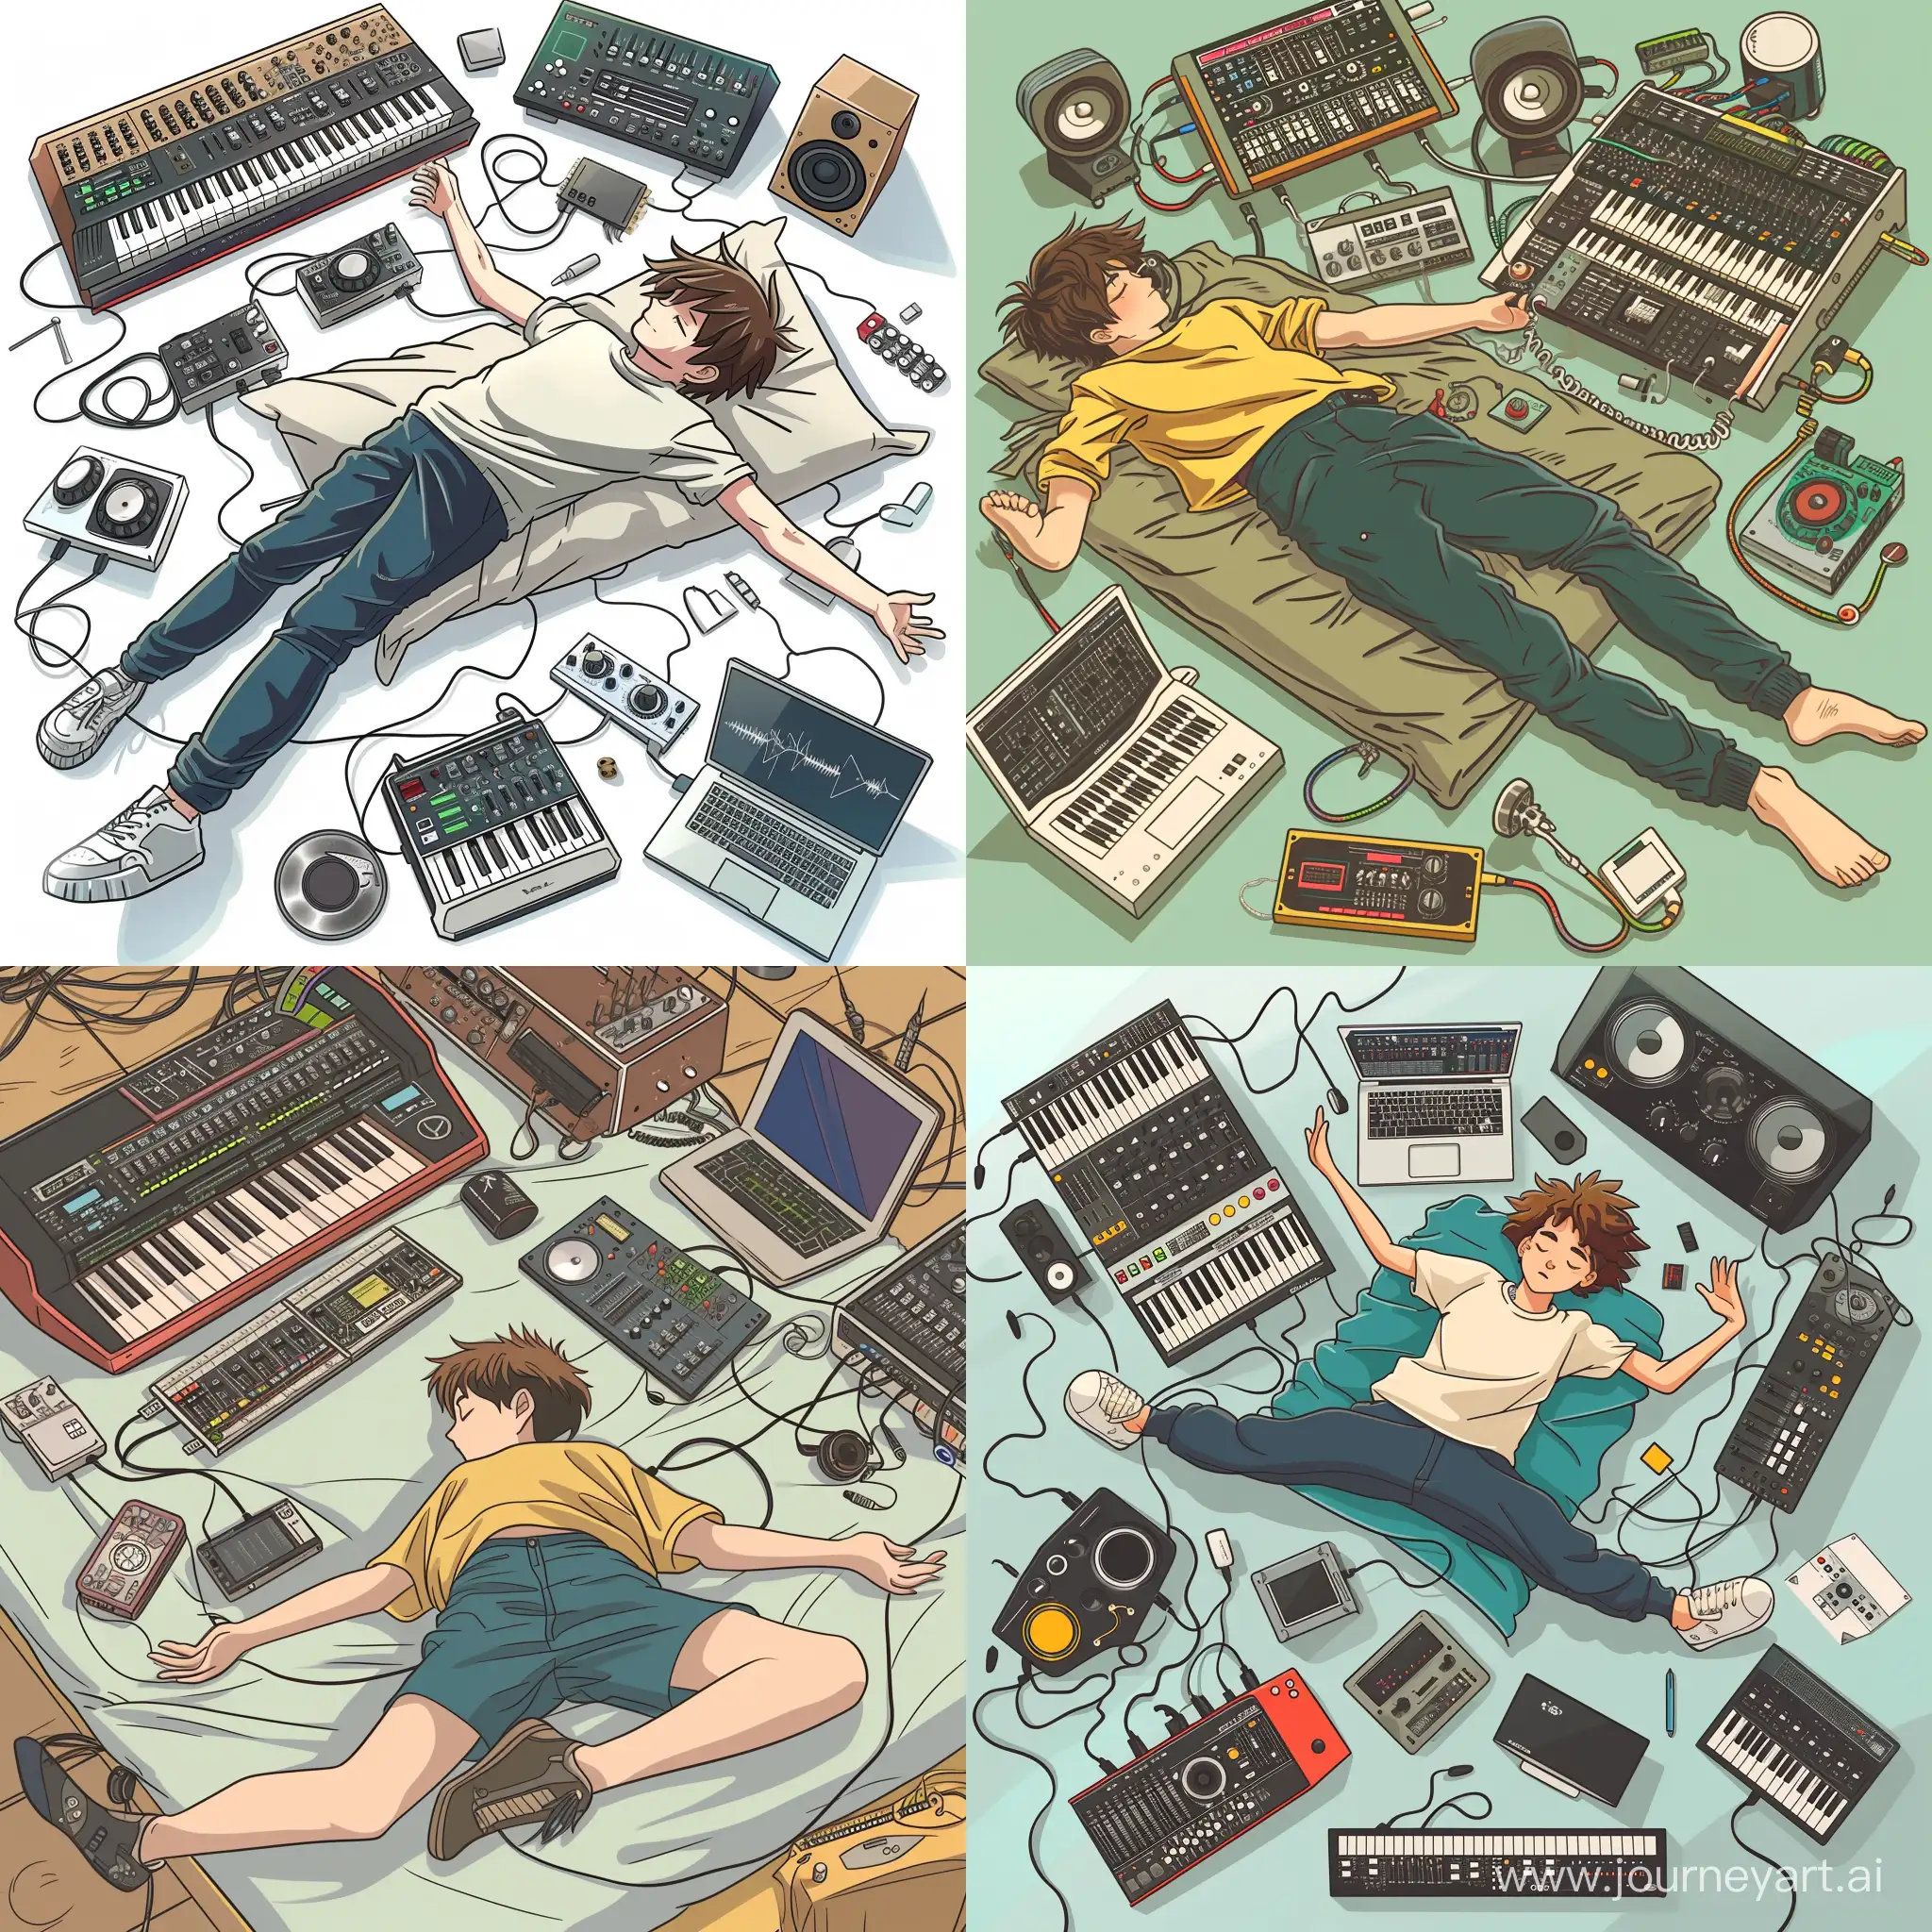 Draw a cartoon-style student lying on a bed on his stomach, arms and legs spread out. He fell asleep with his clothes on. Radio components should be scattered around, there is a mixing console, a sound card, a midi keyboard, a laptop, an oscilloscope.